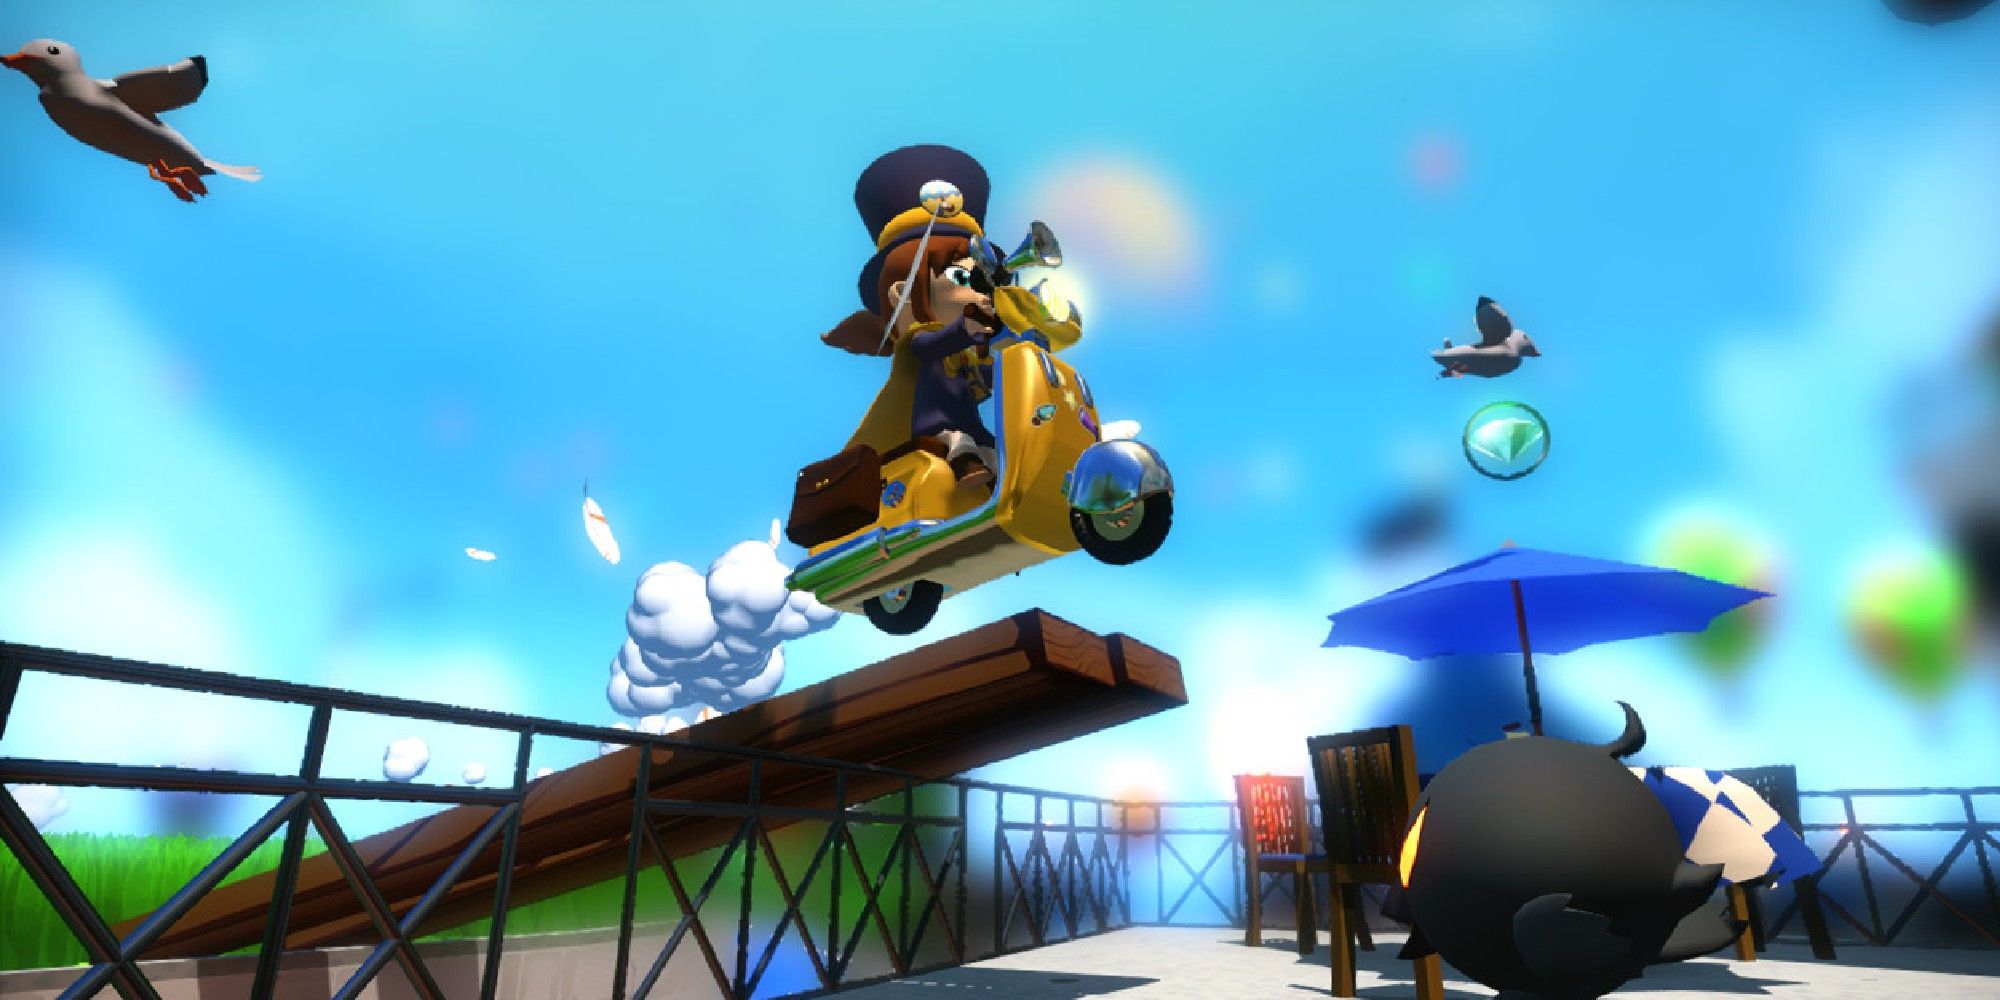 Hat Kid riding a scooter off a ramp during the day.